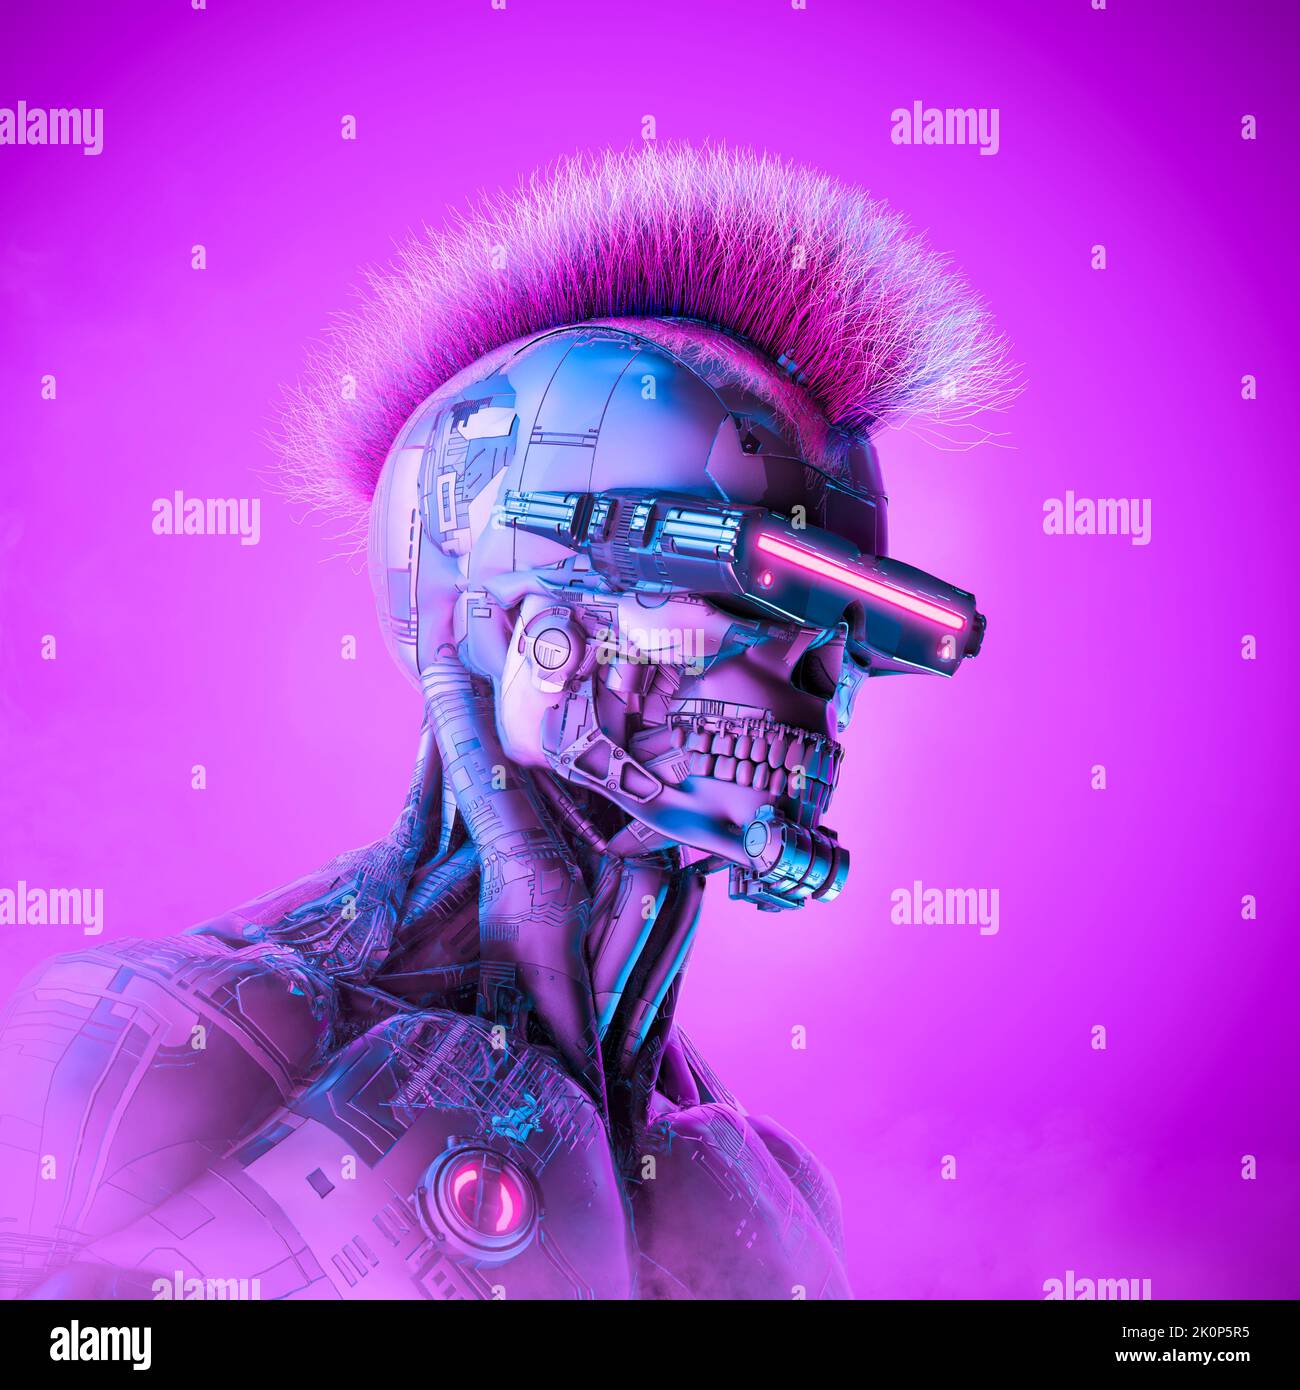 Cyberpunk robot criminal hacker - 3D illustration of science fiction skull faced cyborg with mohawk hair Stock Photo